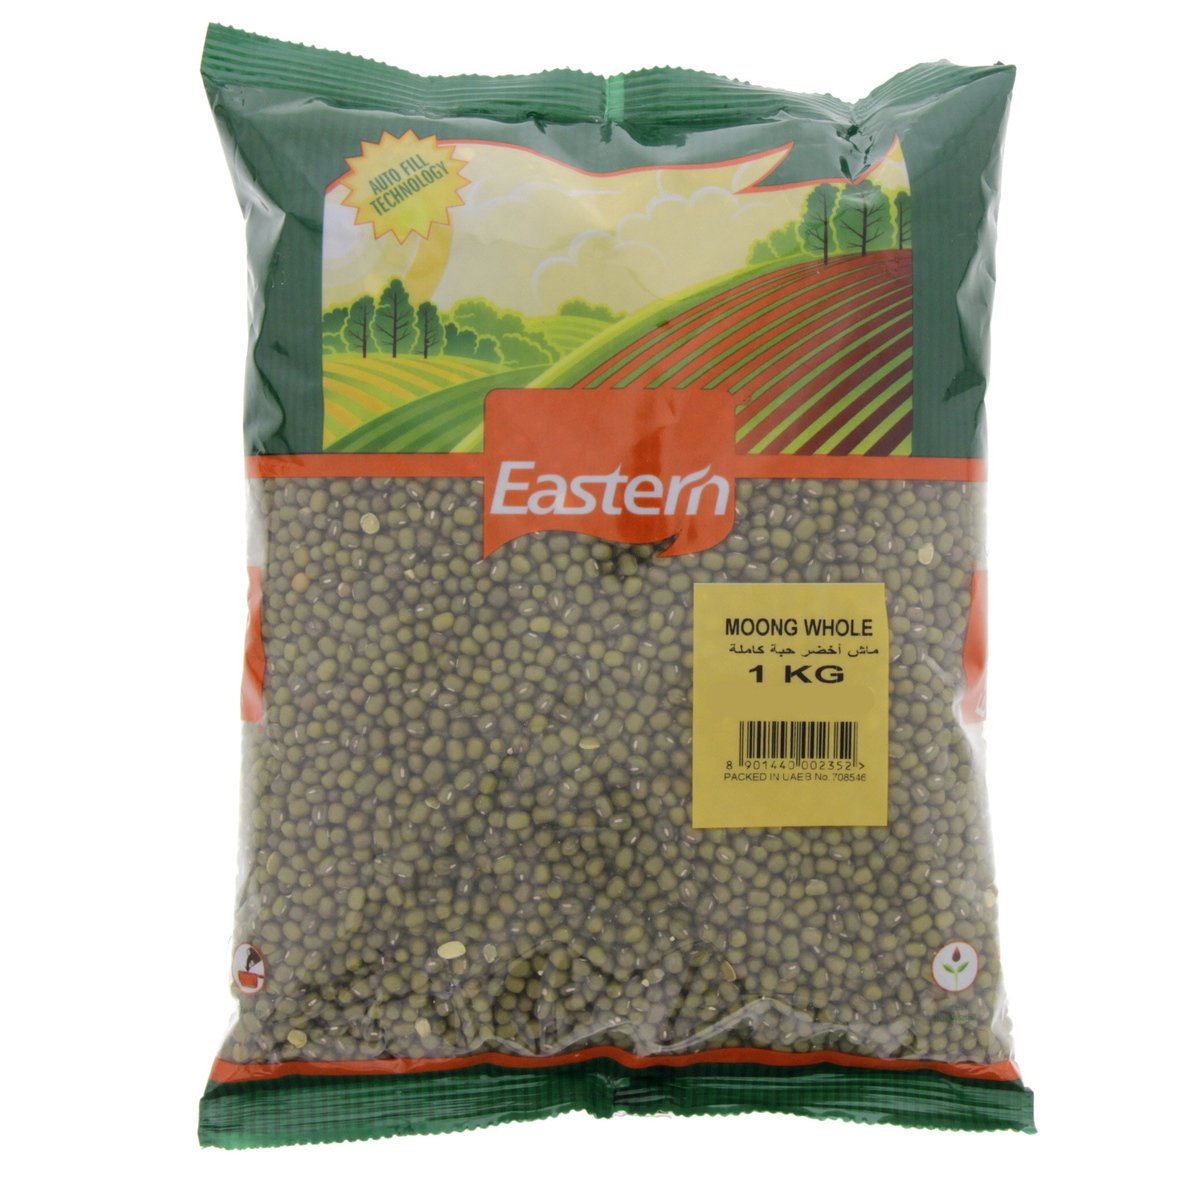 Eastern Moong Whole 1kg